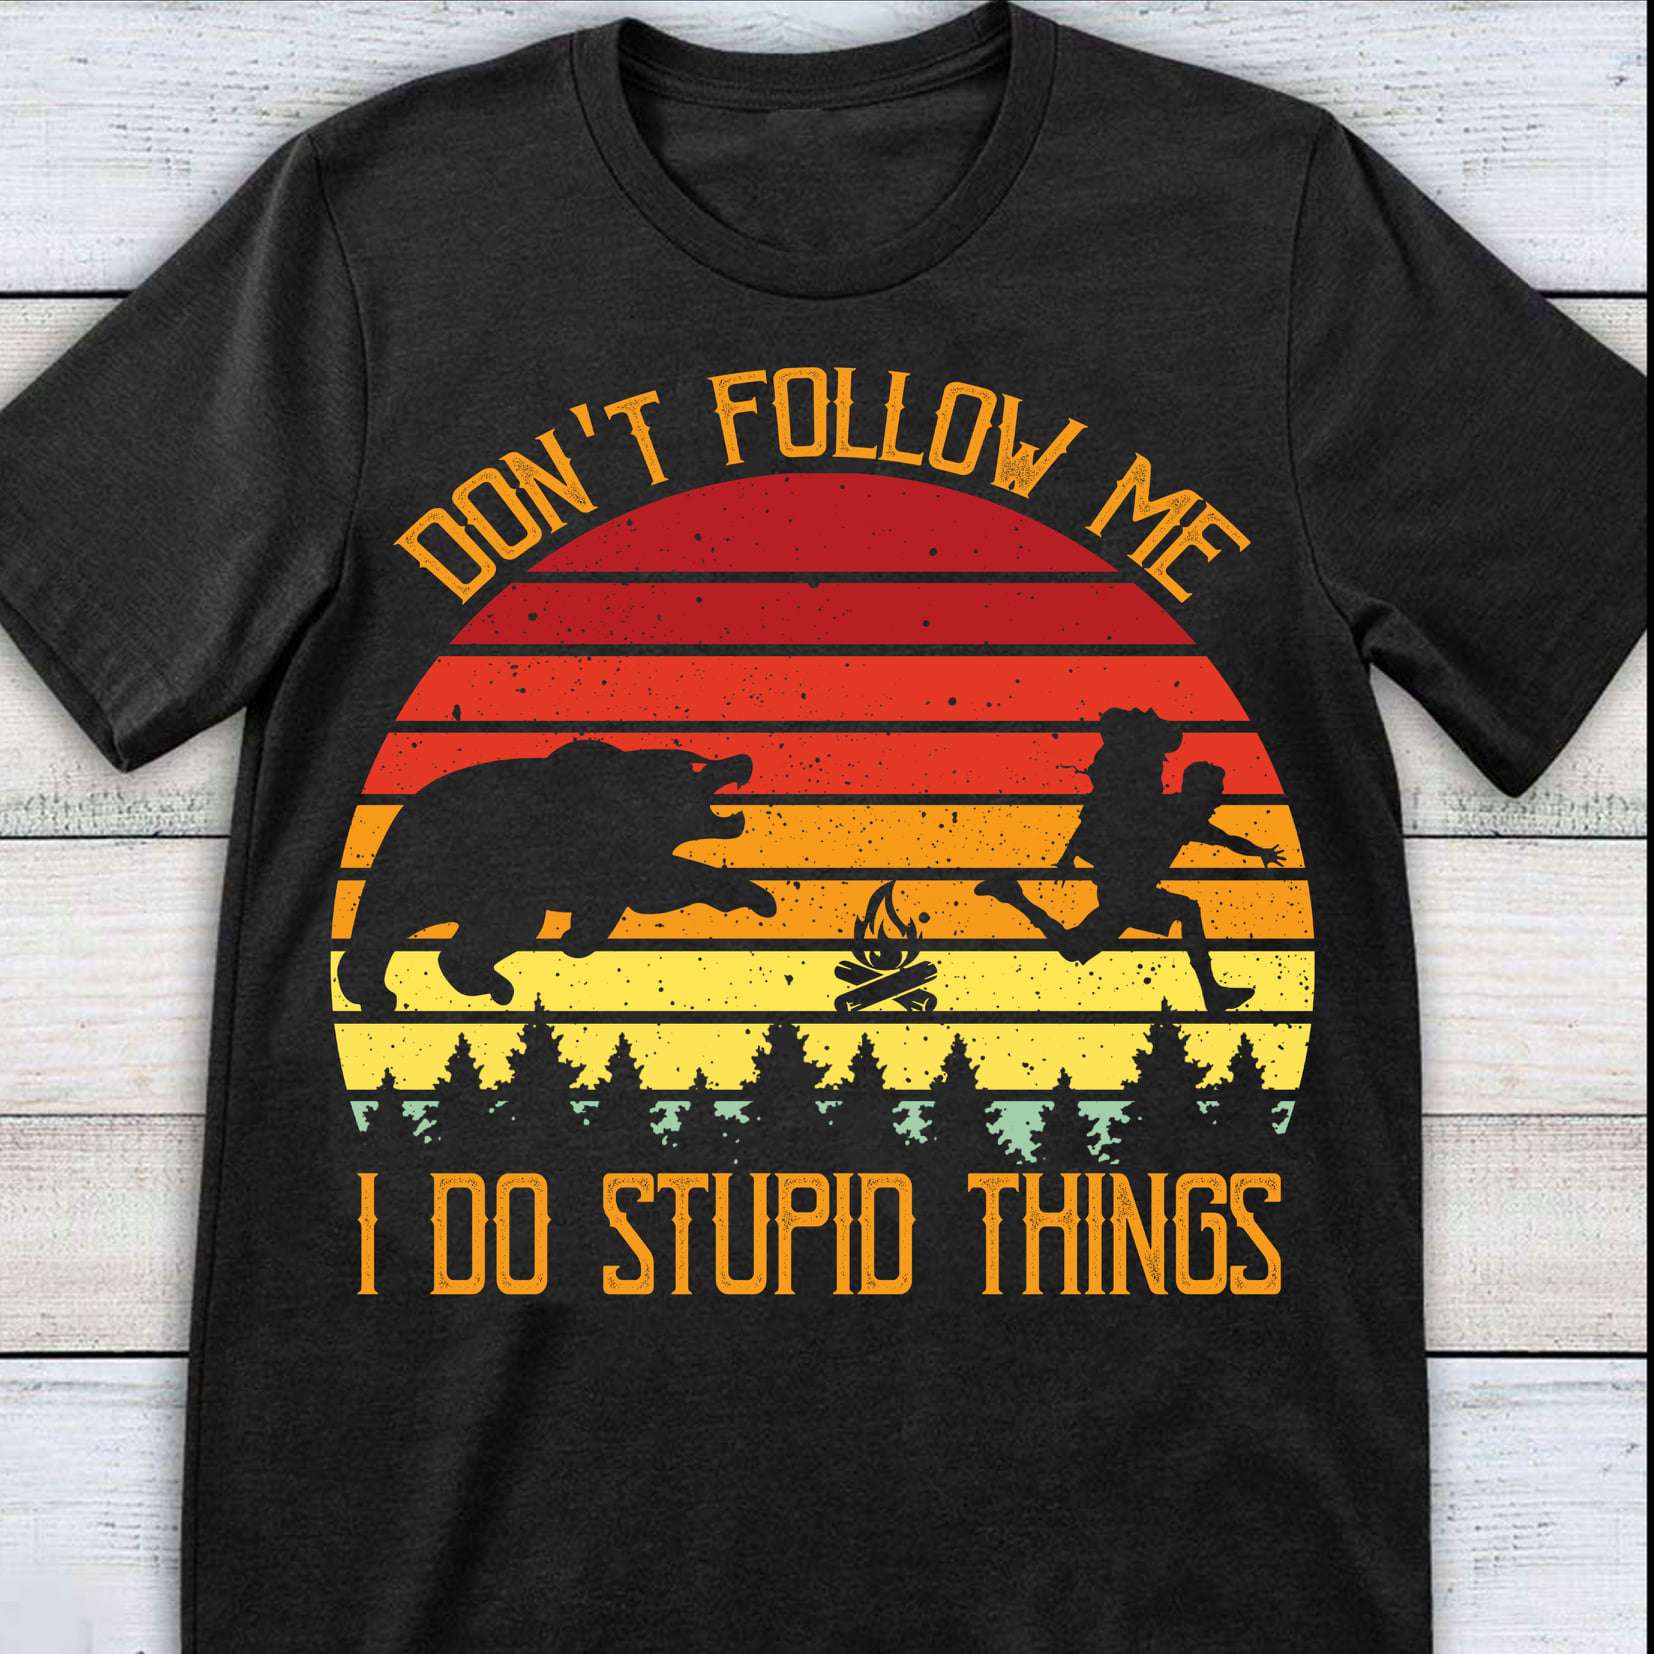 Don't follow me I do stupid things - Running with bear, camping and hiking man